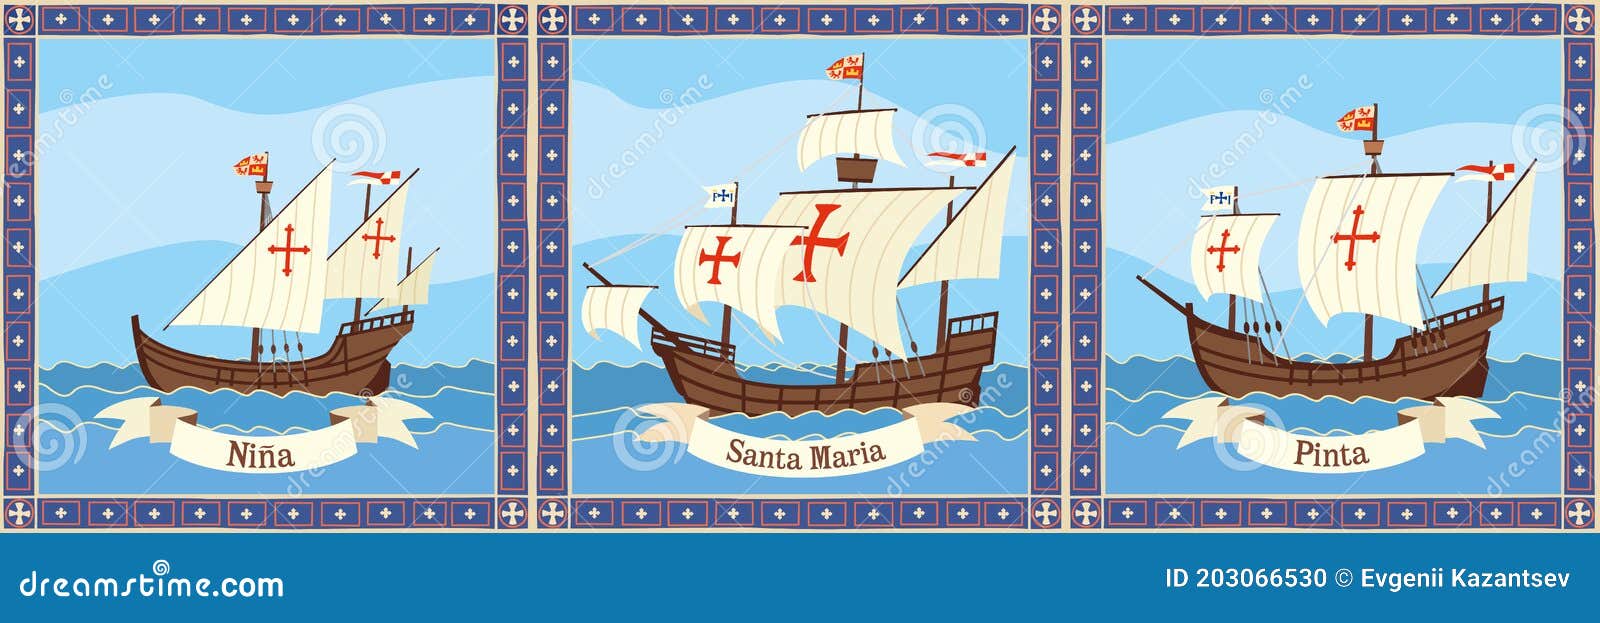 Triptych Ships of Columbus. Santa Maria, Pinta and Ninha Float on the Ocean  Stock Vector - Illustration of stained, medieval: 203066530